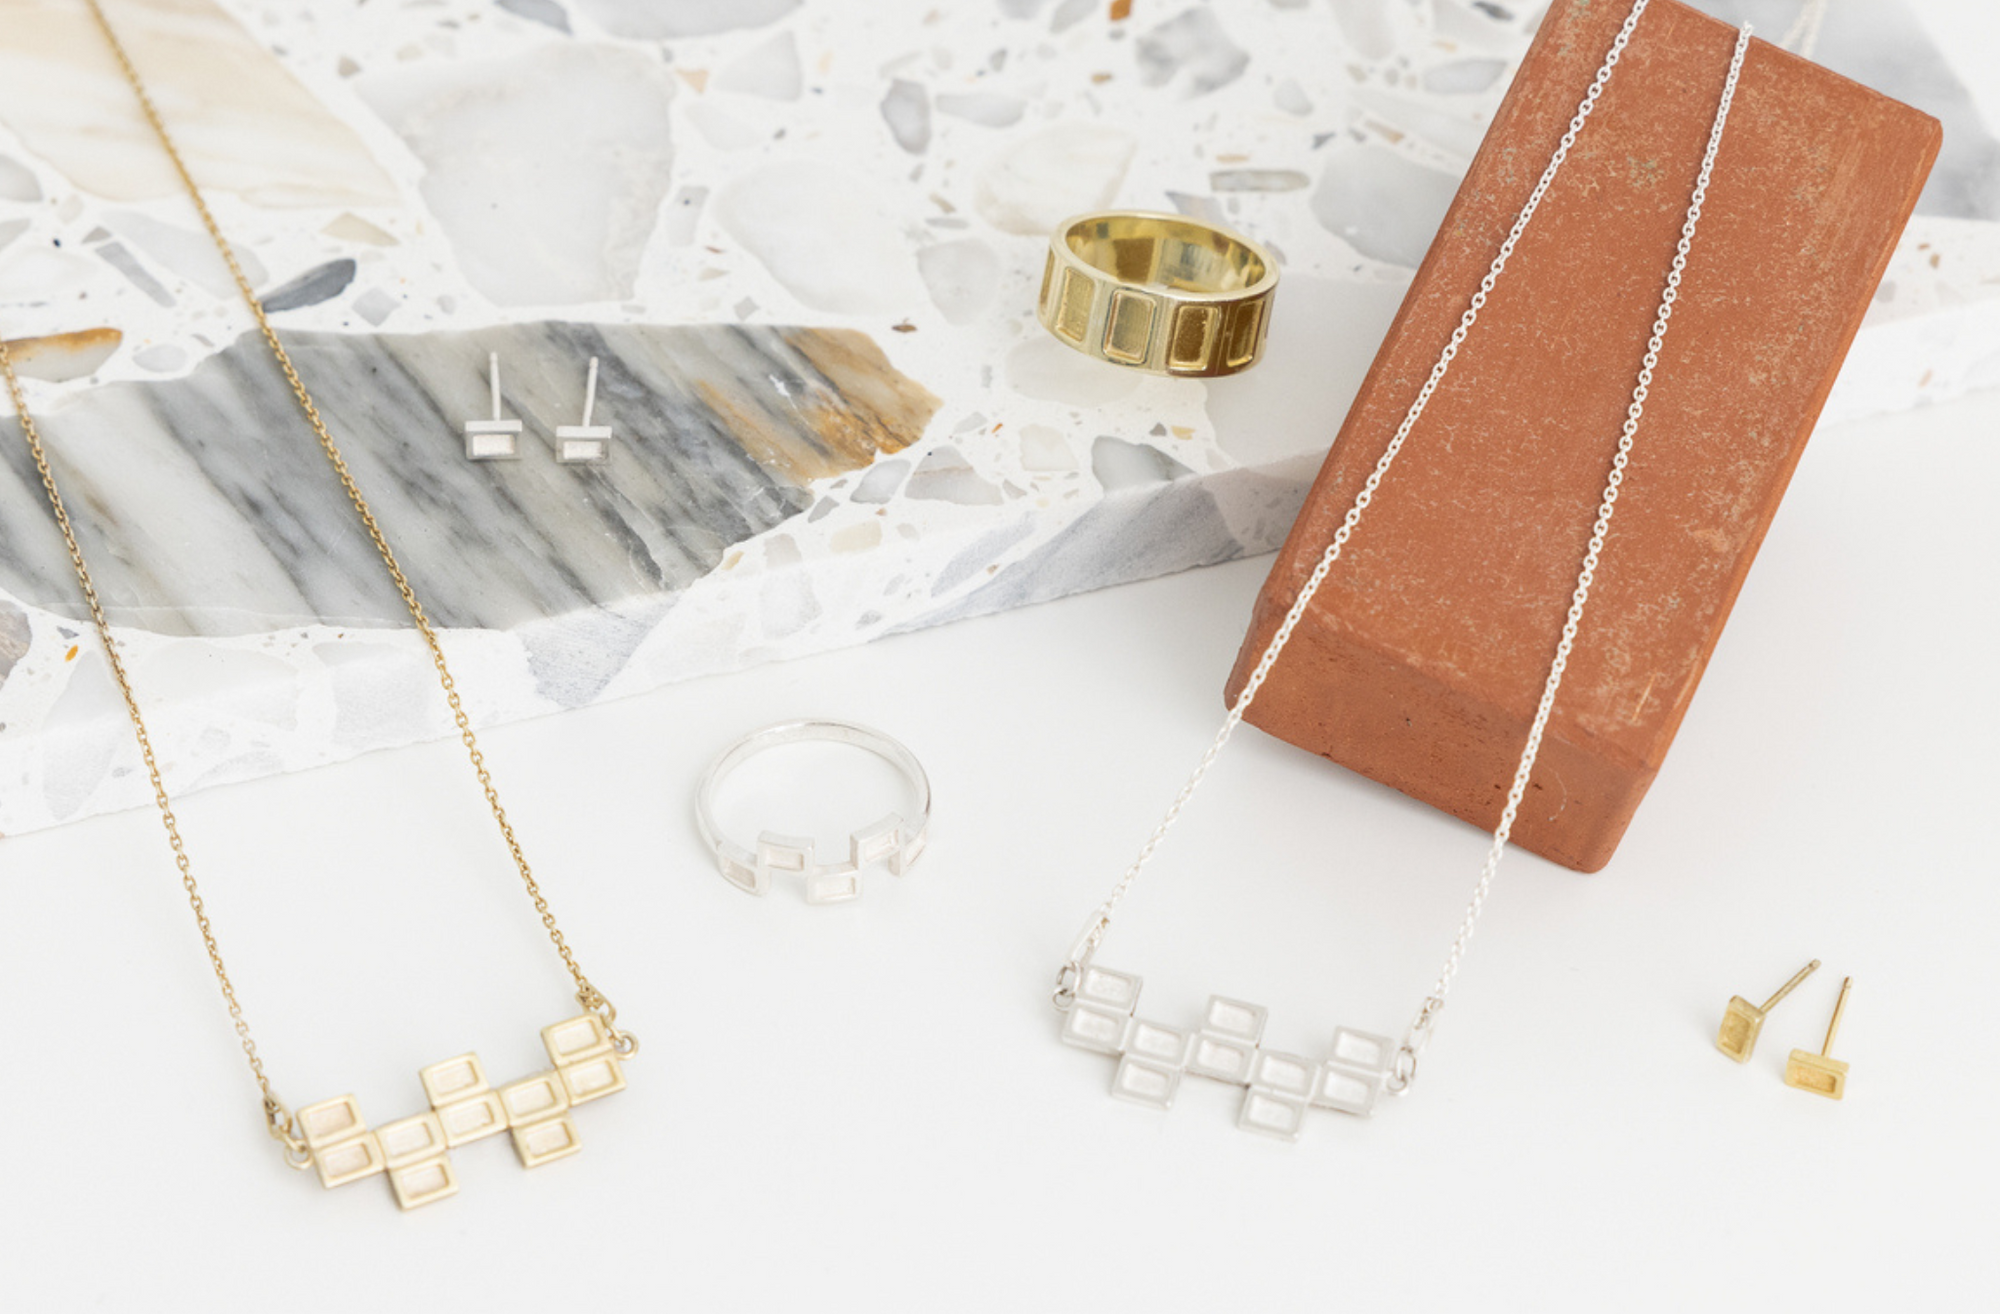 A selection from the Concrete Waffles Collection, featuring jewelry inspired by the architectural elements of the Washington D.C. Metro, arranged on a terrazzo slab with a brick backdrop.